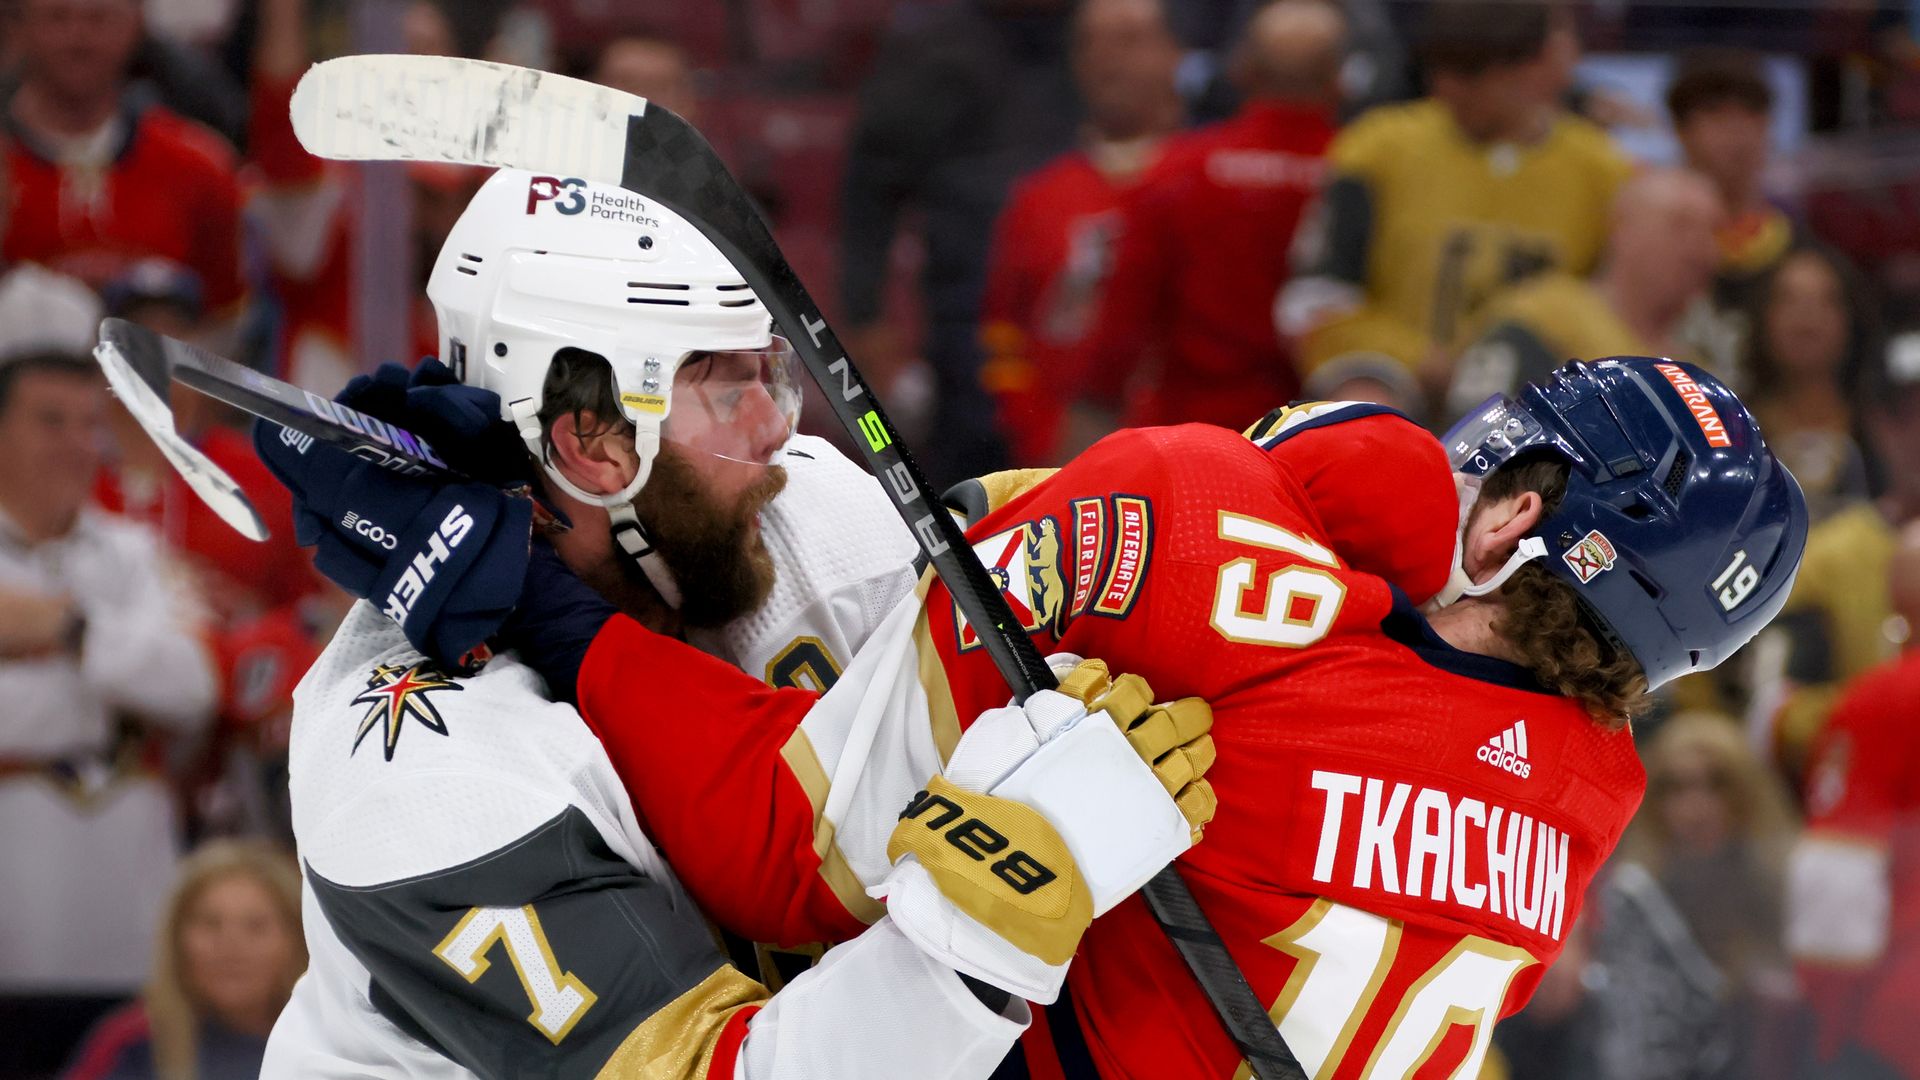 Matthew Tkachuk takes a hit in Game 4 of the Stanley Cup Final. It's just been that kind of series for the Panthers. Photo: Bruce Bennett/Getty Images